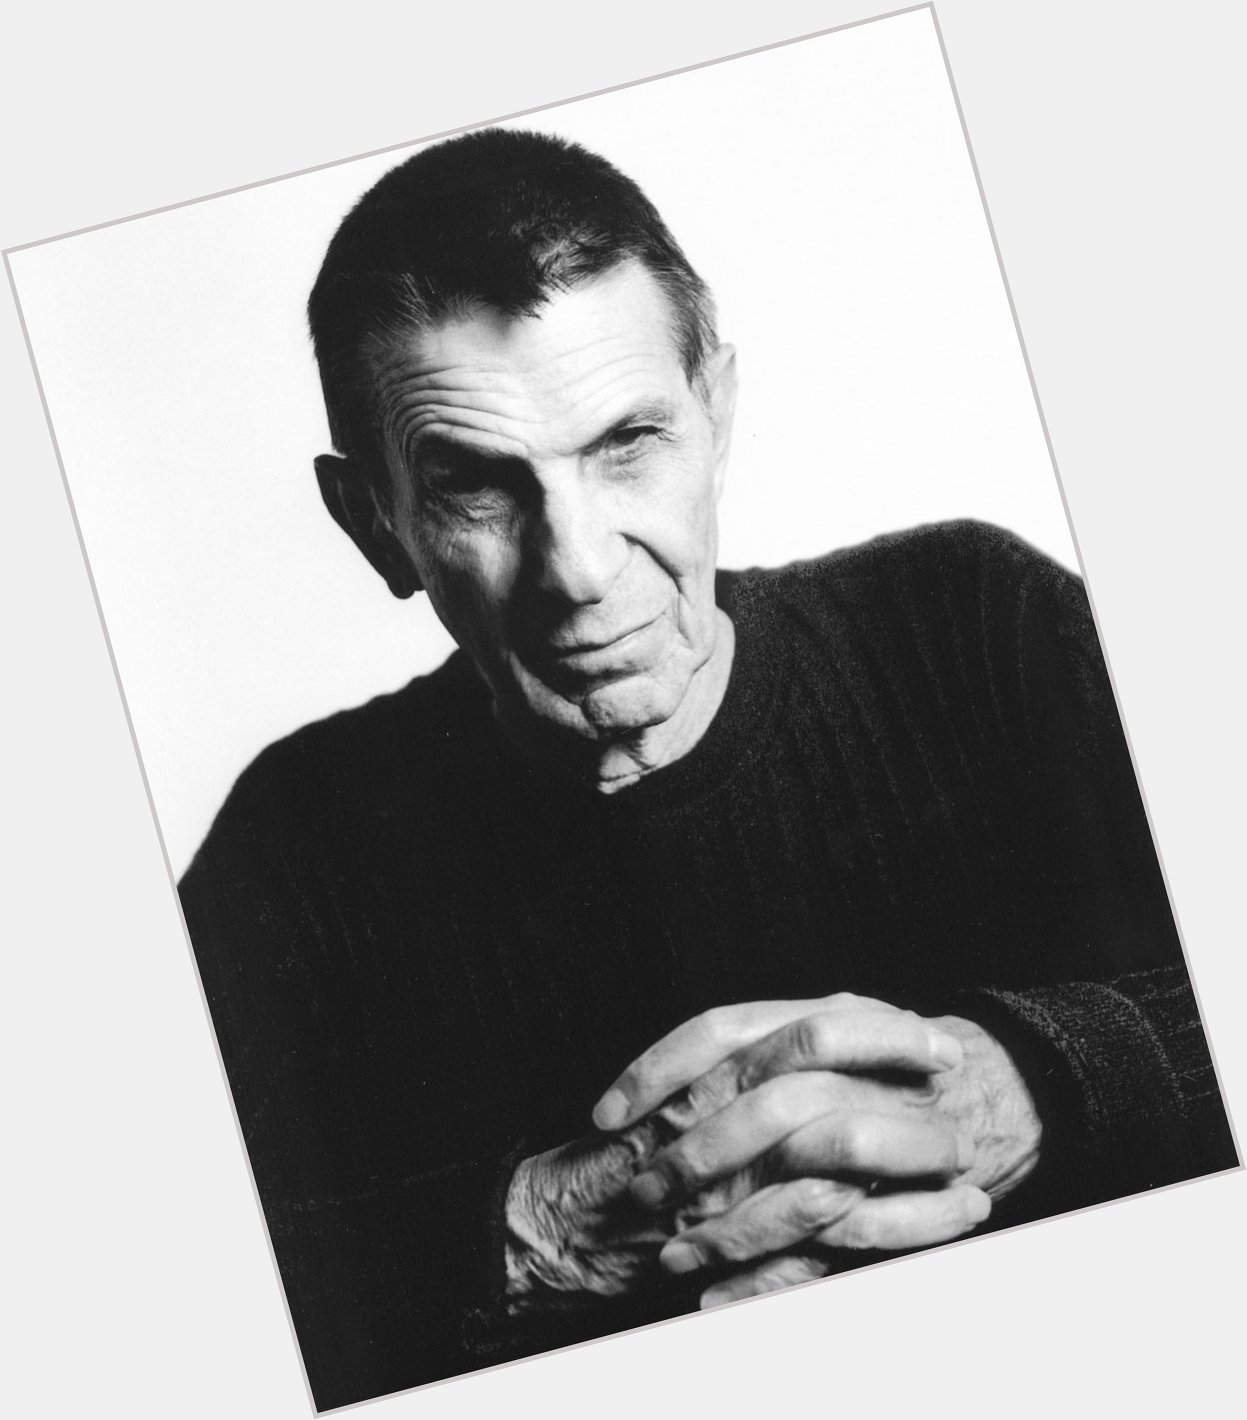 R.I.P. and Happy birthday to Leonard Nimoy, who was born on this day in 1931.  